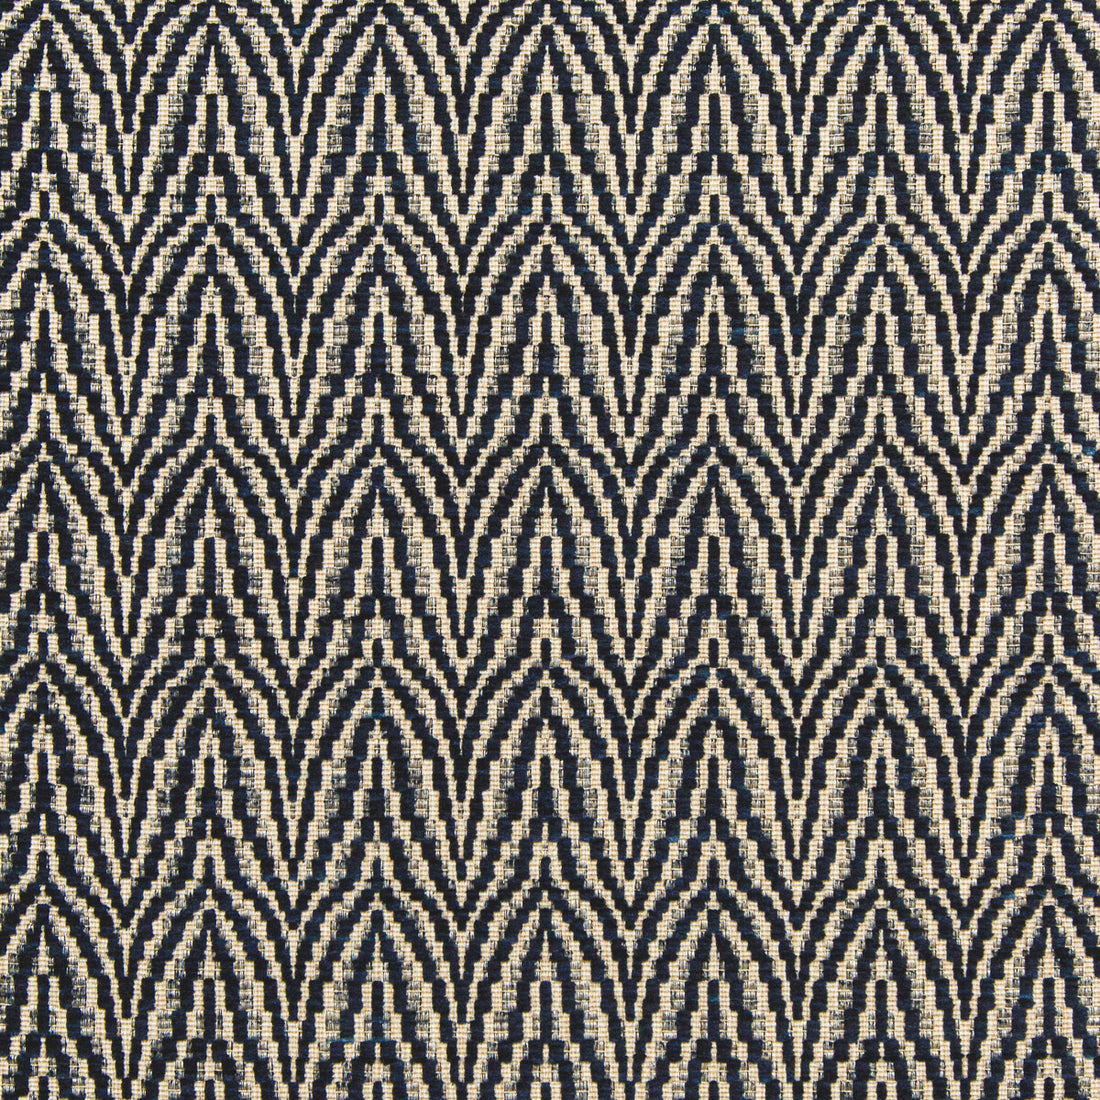 Blyth Weave fabric in navy color - pattern 2020108.50.0 - by Lee Jofa in the Linford Weaves collection